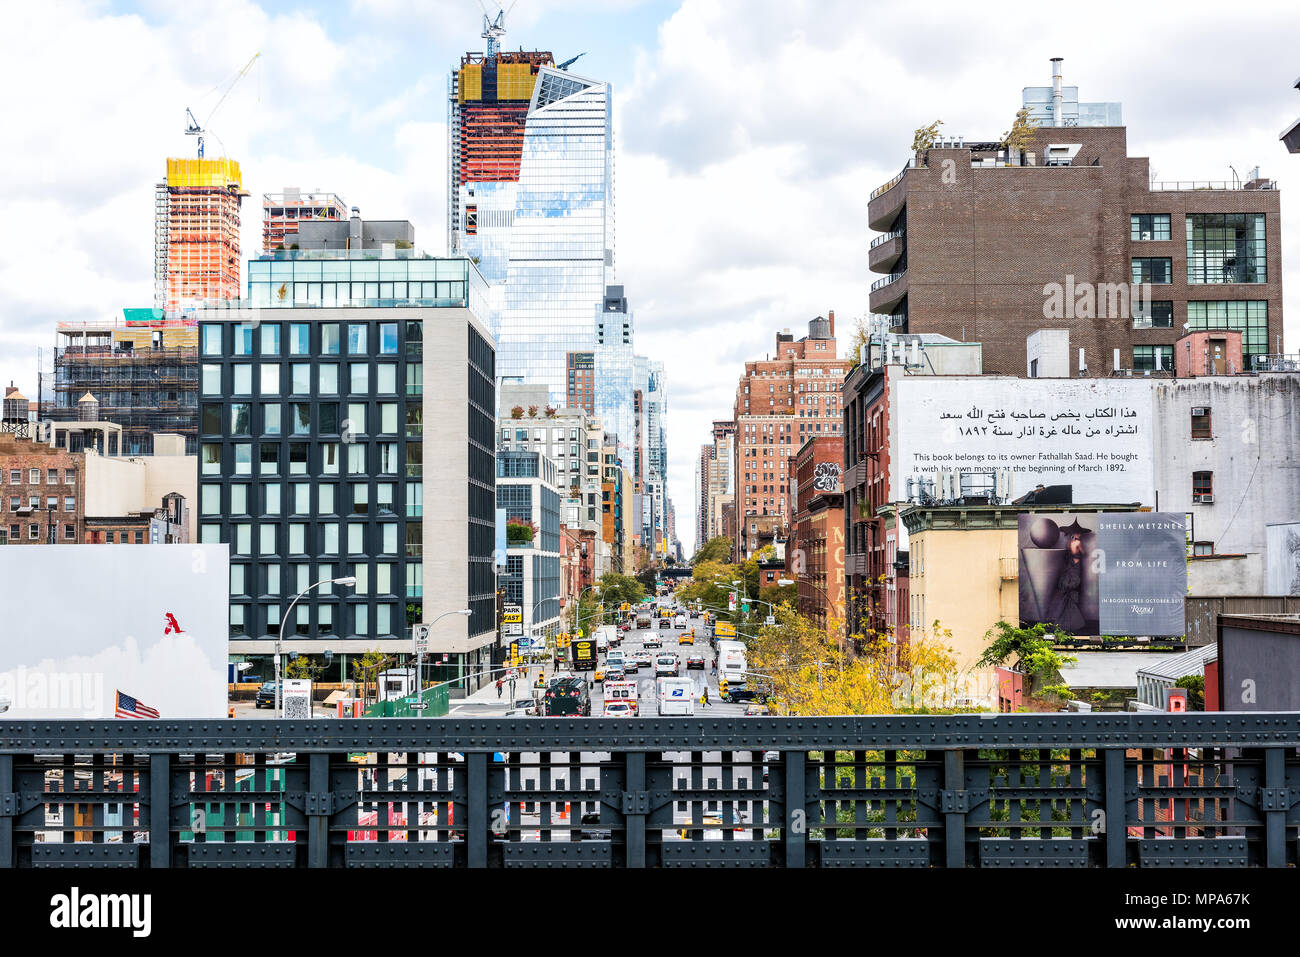 New York City, USA - October 30, 2017: Highline, high line, urban garden in NYC with Chelsea West Side by Hudson Yards looking at view under Stock Photo